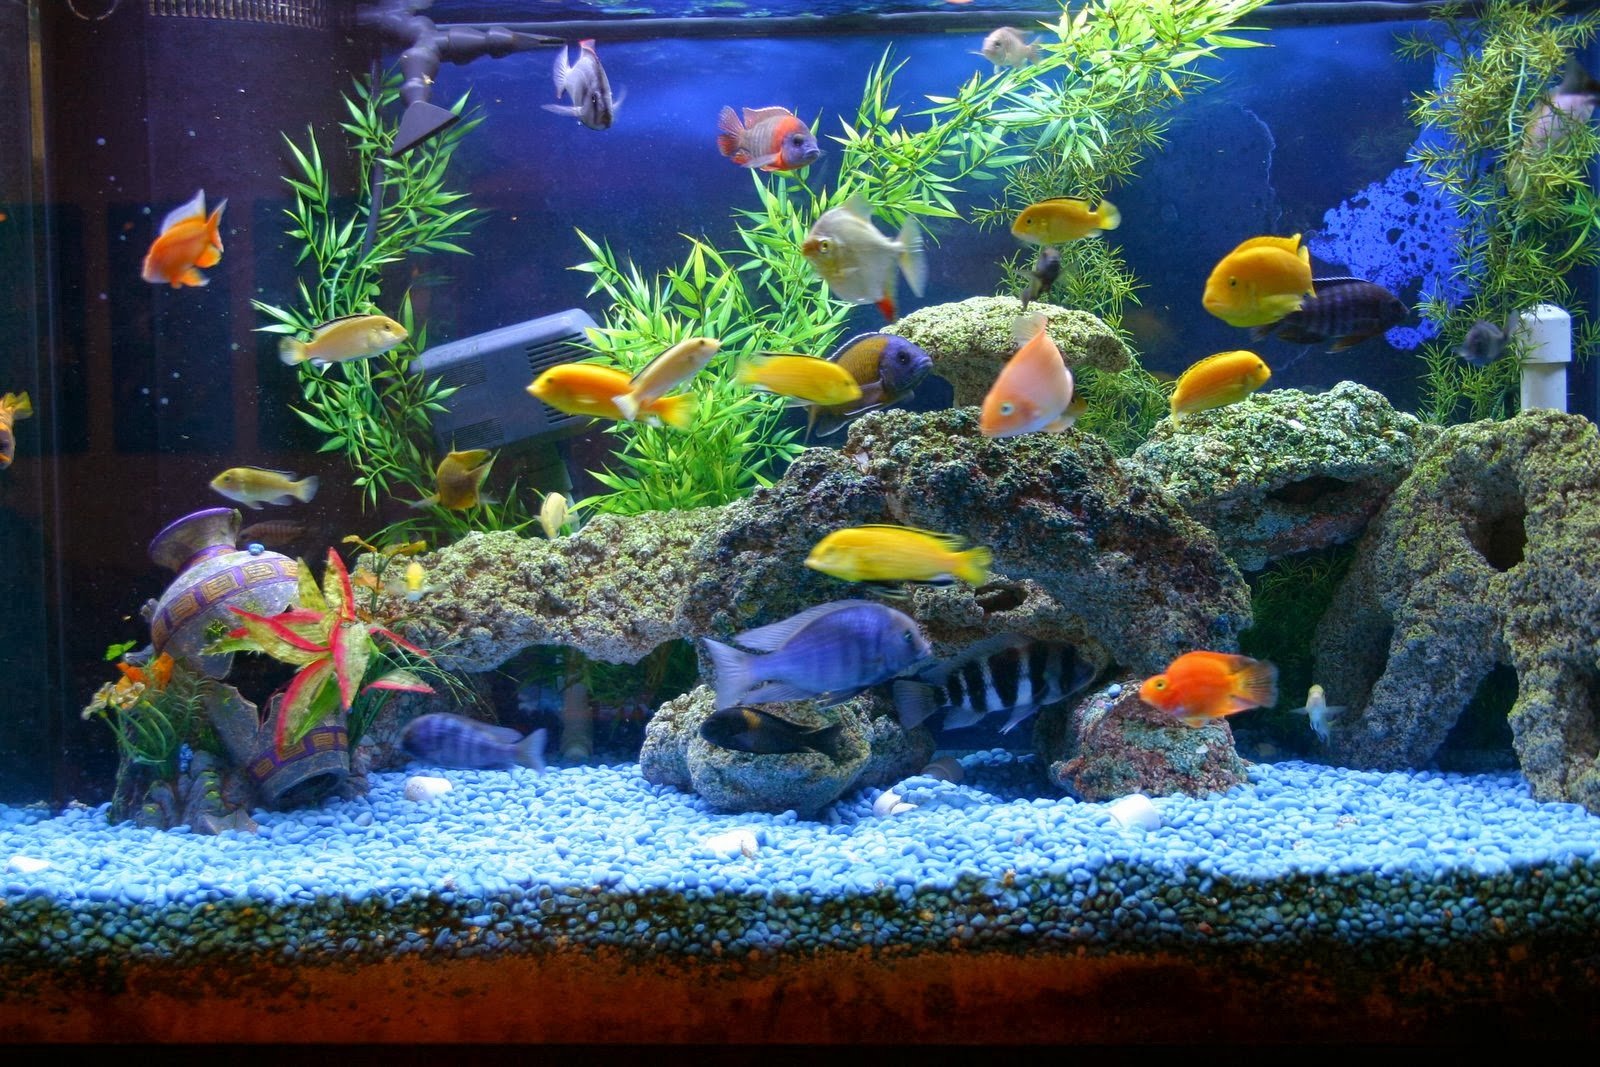 New Peer-Reviewed Publication - The “Fish Tank” Experiments: Metacognitive Awareness of DSRP Significantly Increases Cognitive Complexity